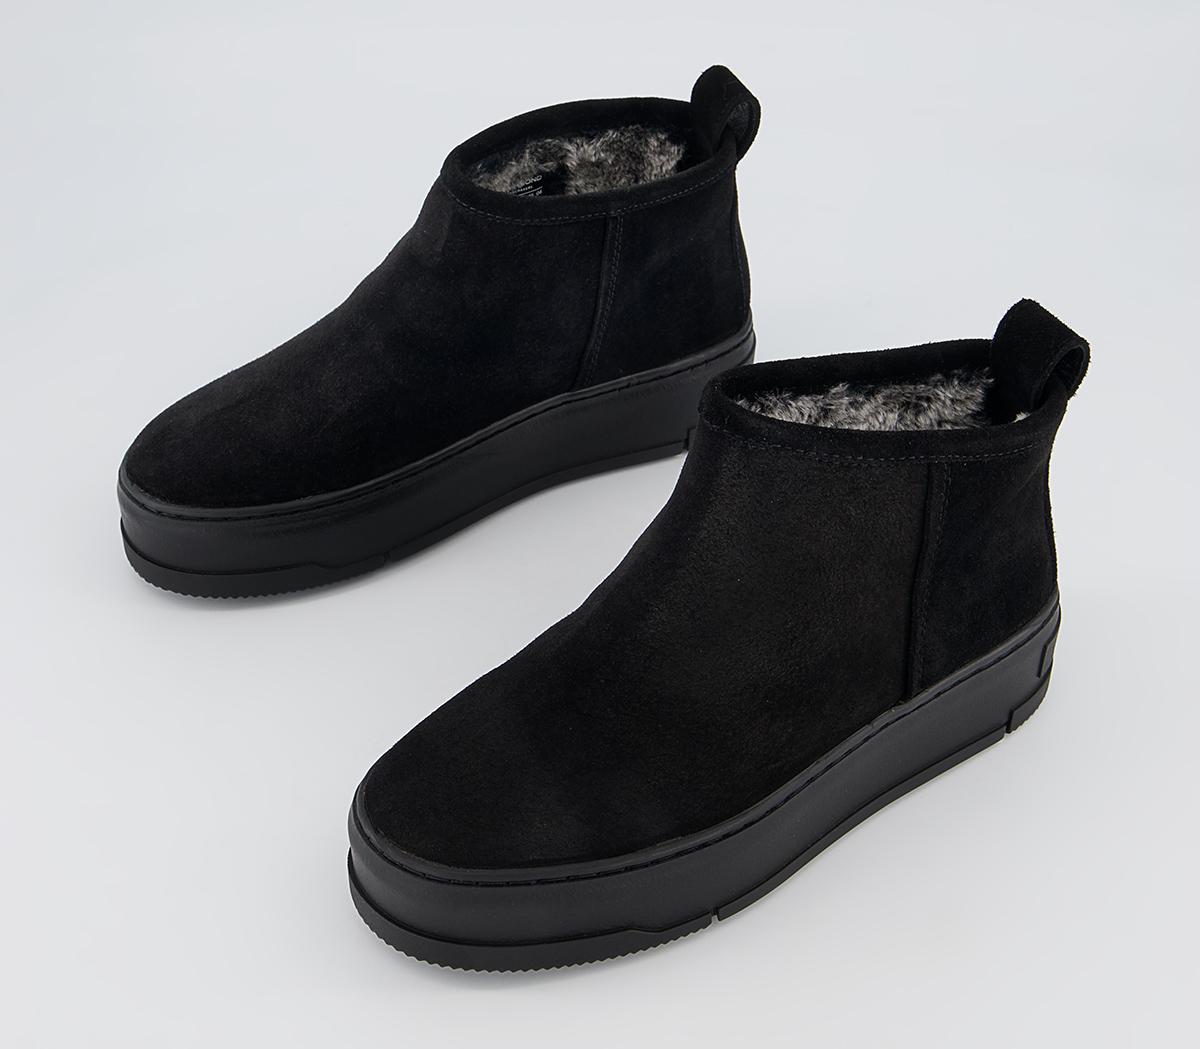 Vagabond Shoemakers Judy Low Slip On Boots Black Suede - Women's Boots